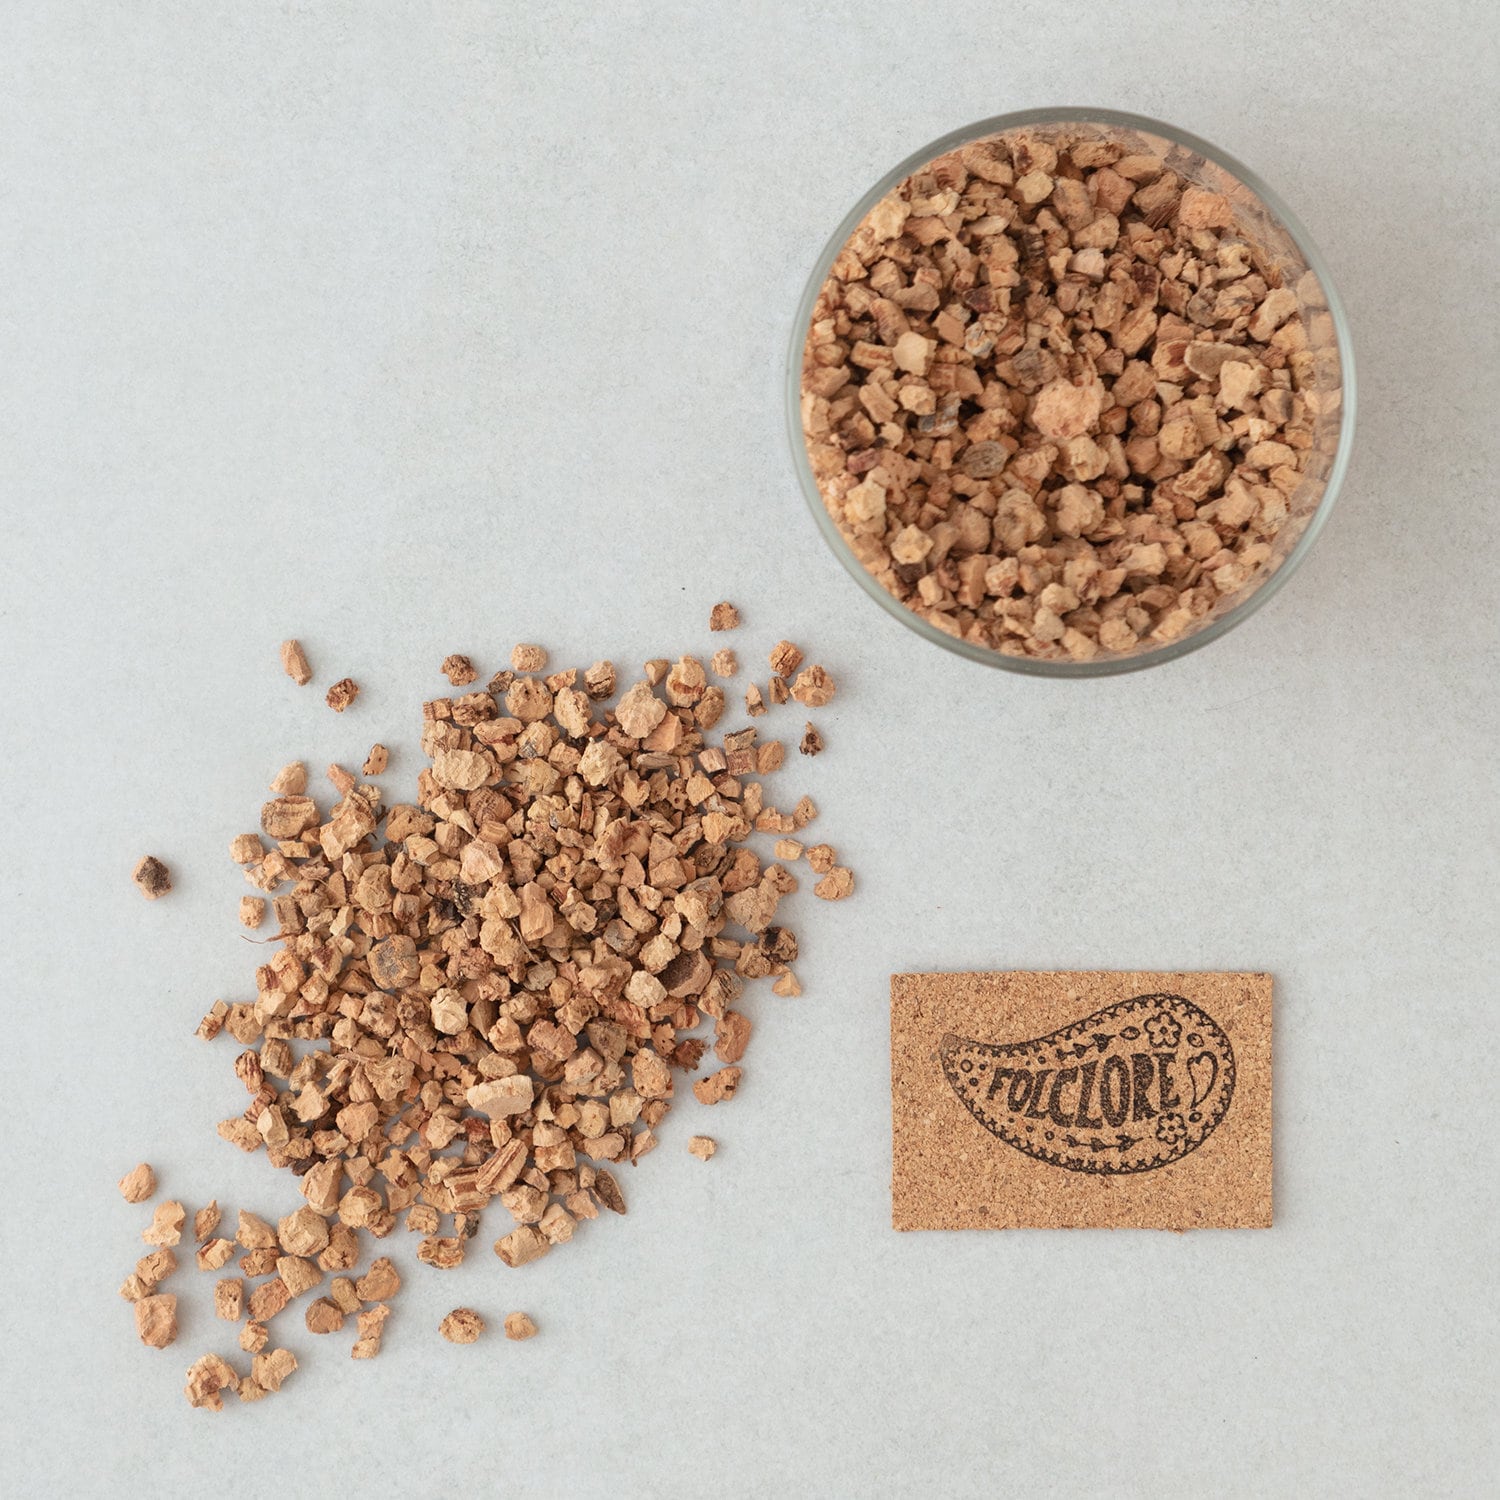 Organic Buckwheat Hulls are a natural product ideal for Bean Bag Filling